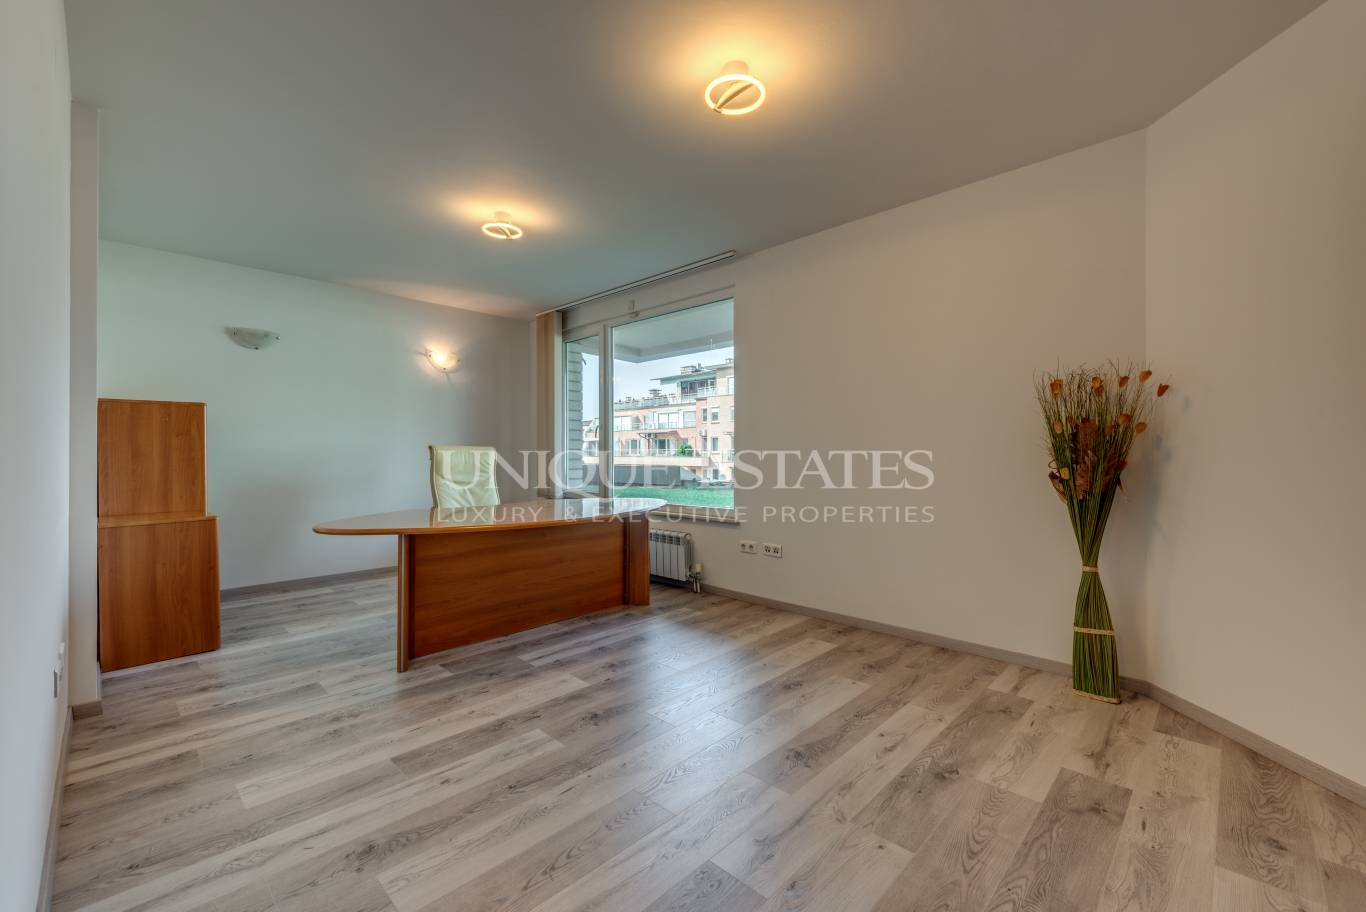 Office for rent in Sofia, Lozenets with listing ID: K14907 - image 5